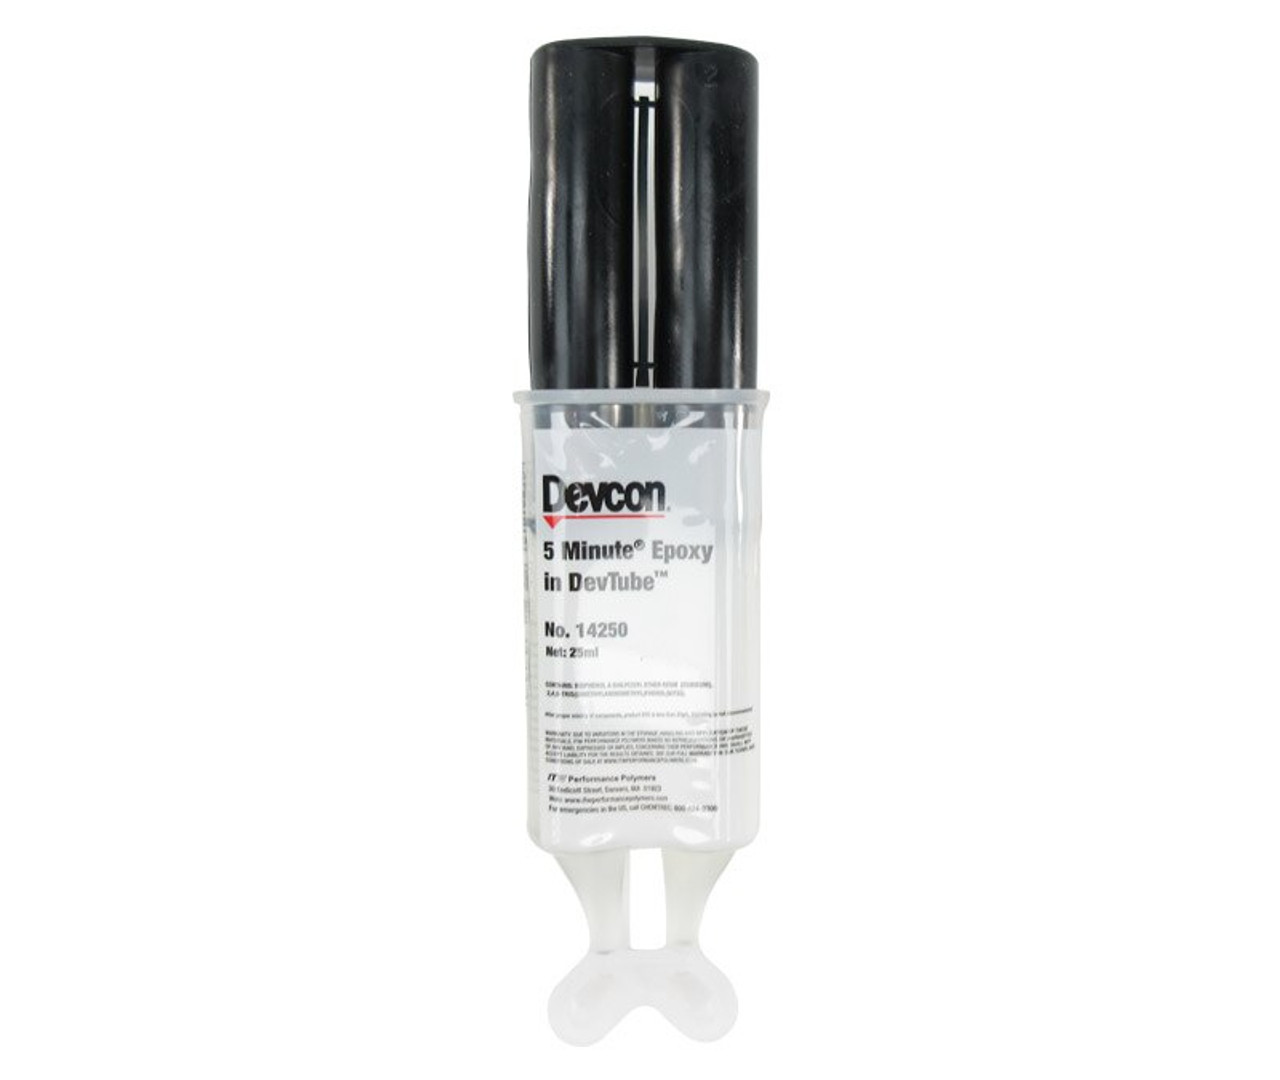 Devcon 5 Minute Amber Two-Part Epoxy Adhesive, Base & Accelerator